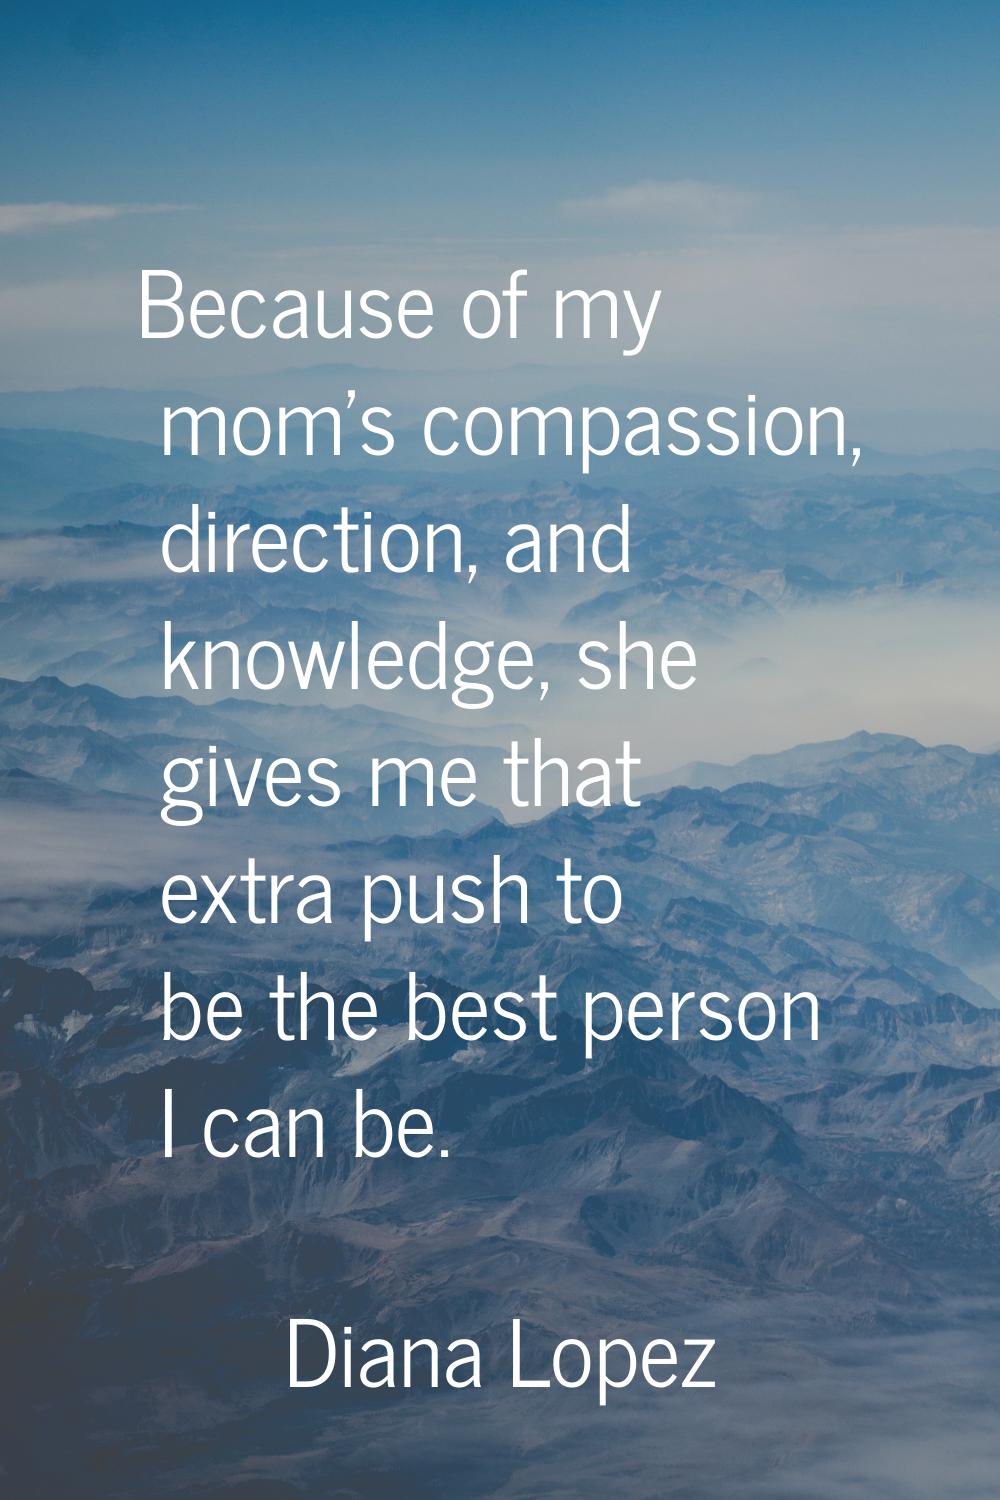 Because of my mom's compassion, direction, and knowledge, she gives me that extra push to be the be